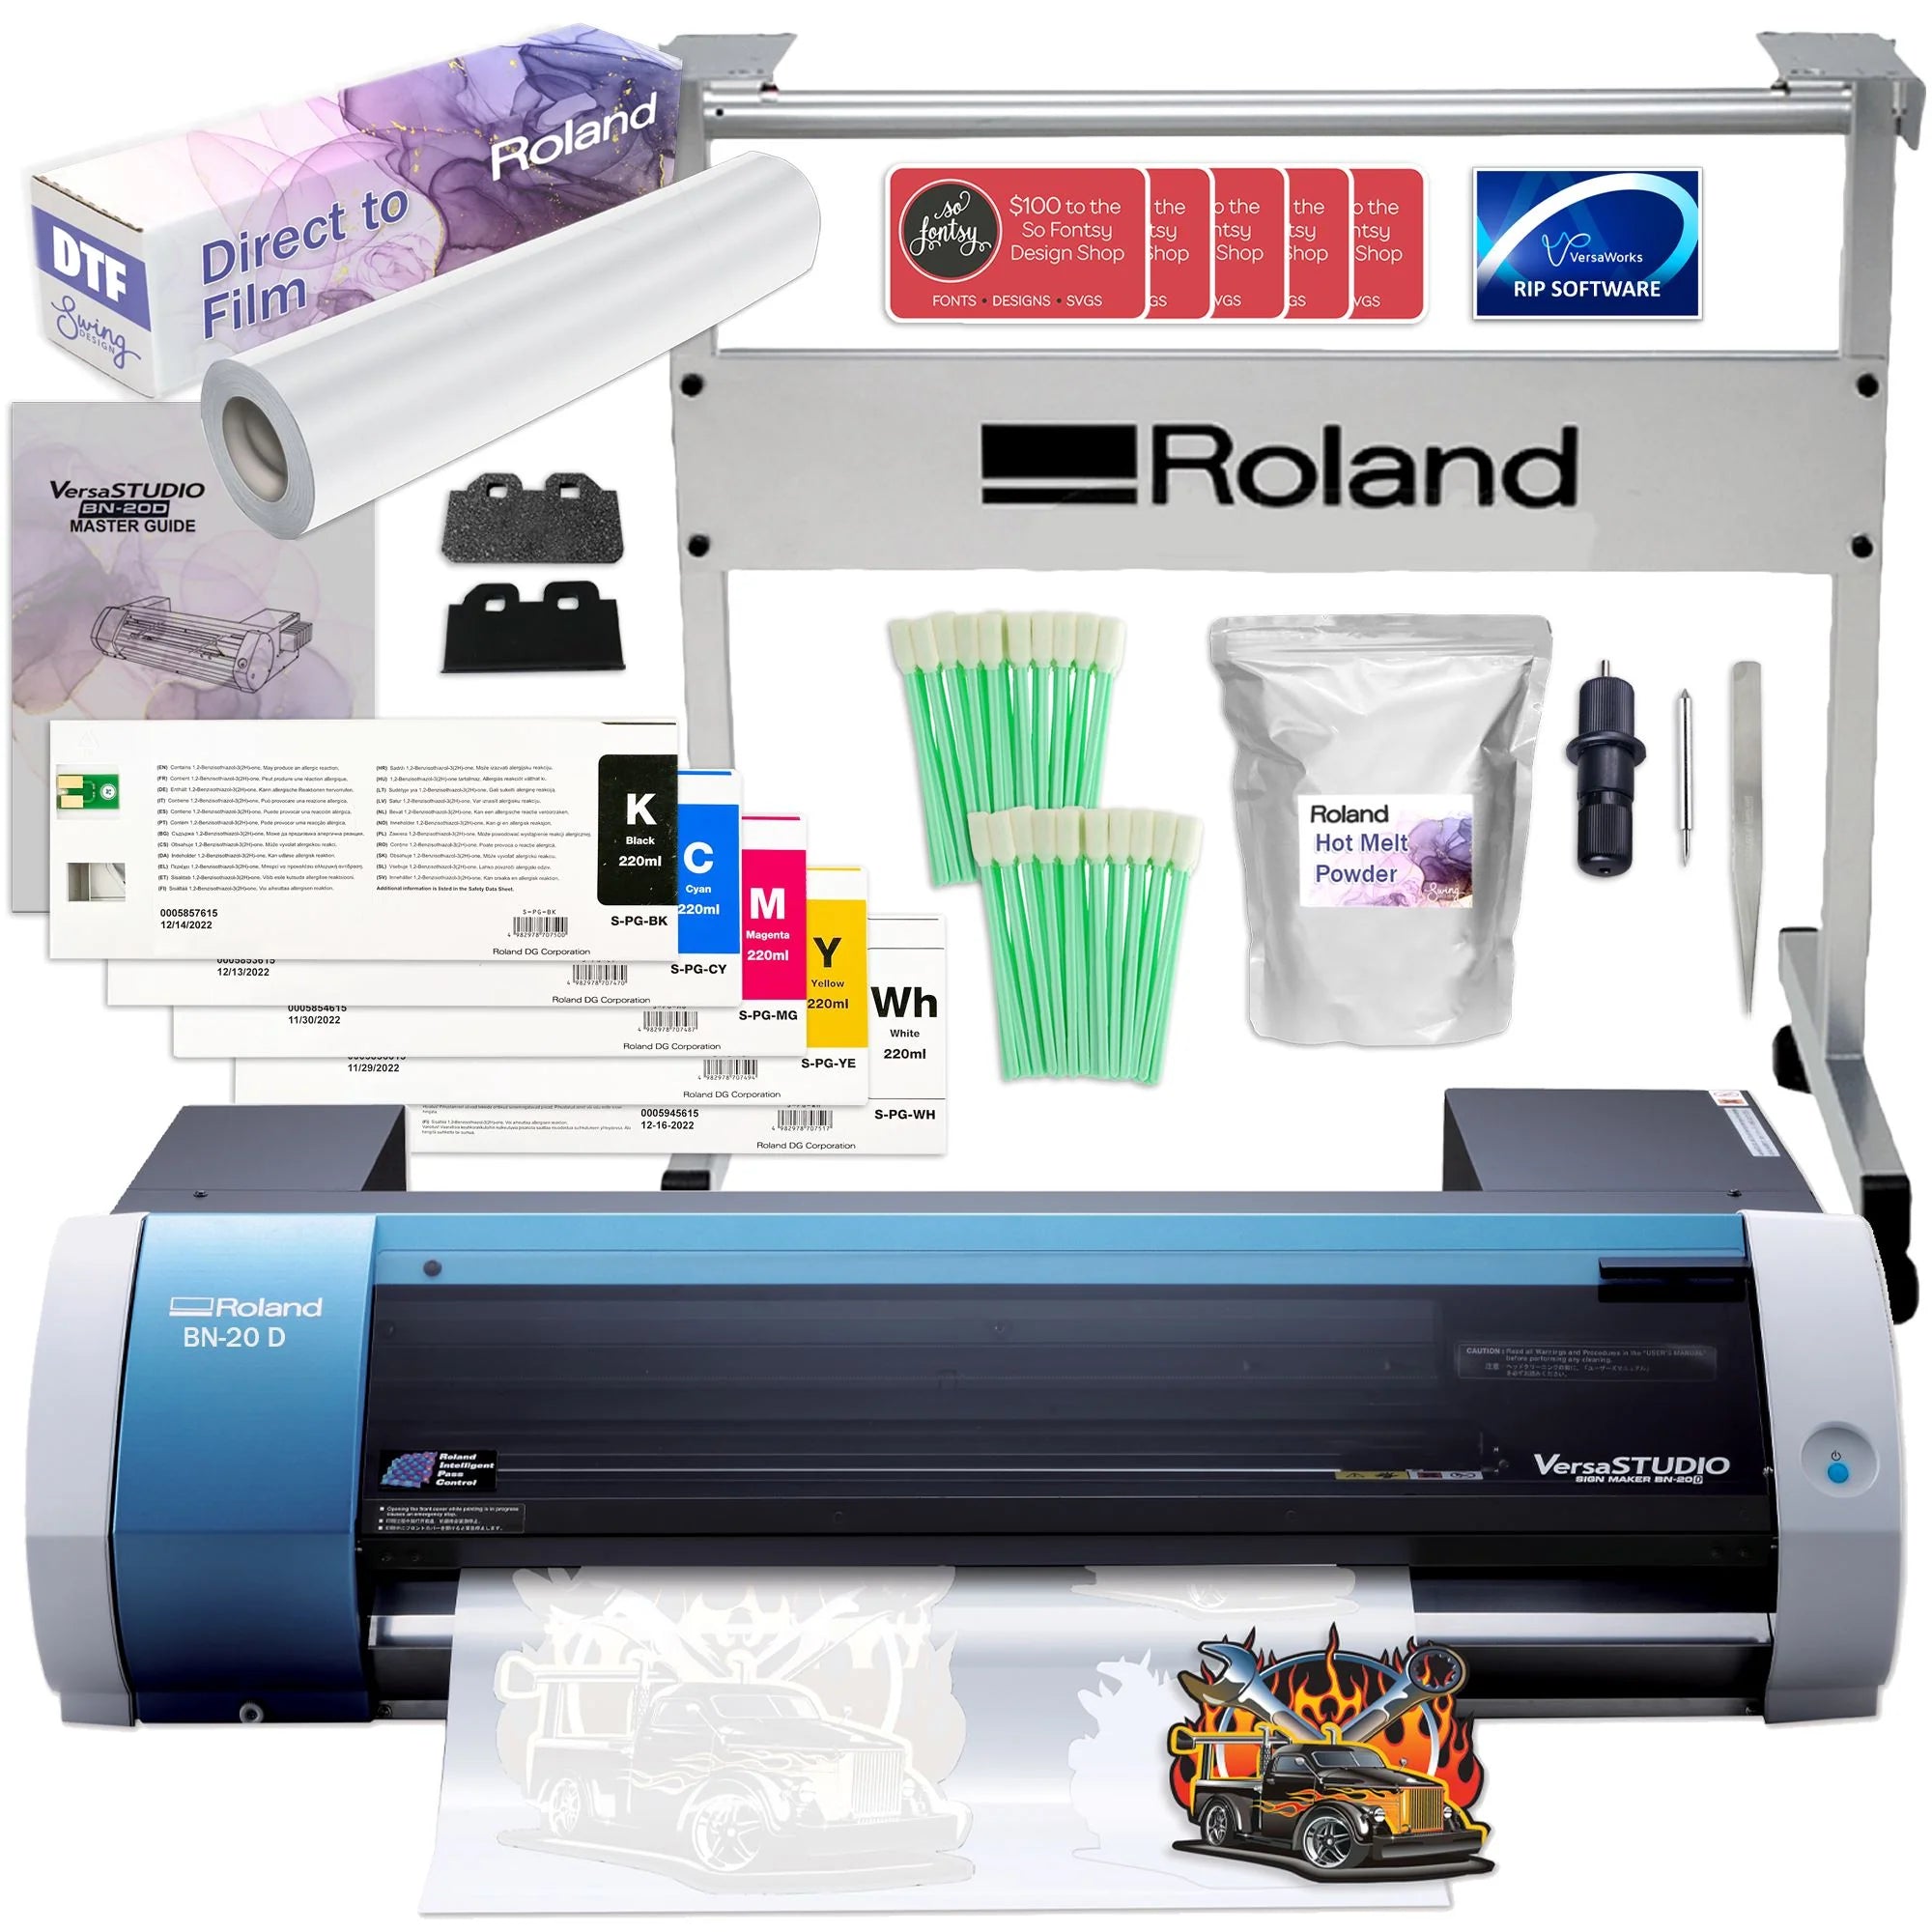 A Step-by-Step Guide to Maintaining Your Direct to Film Transfer Printer